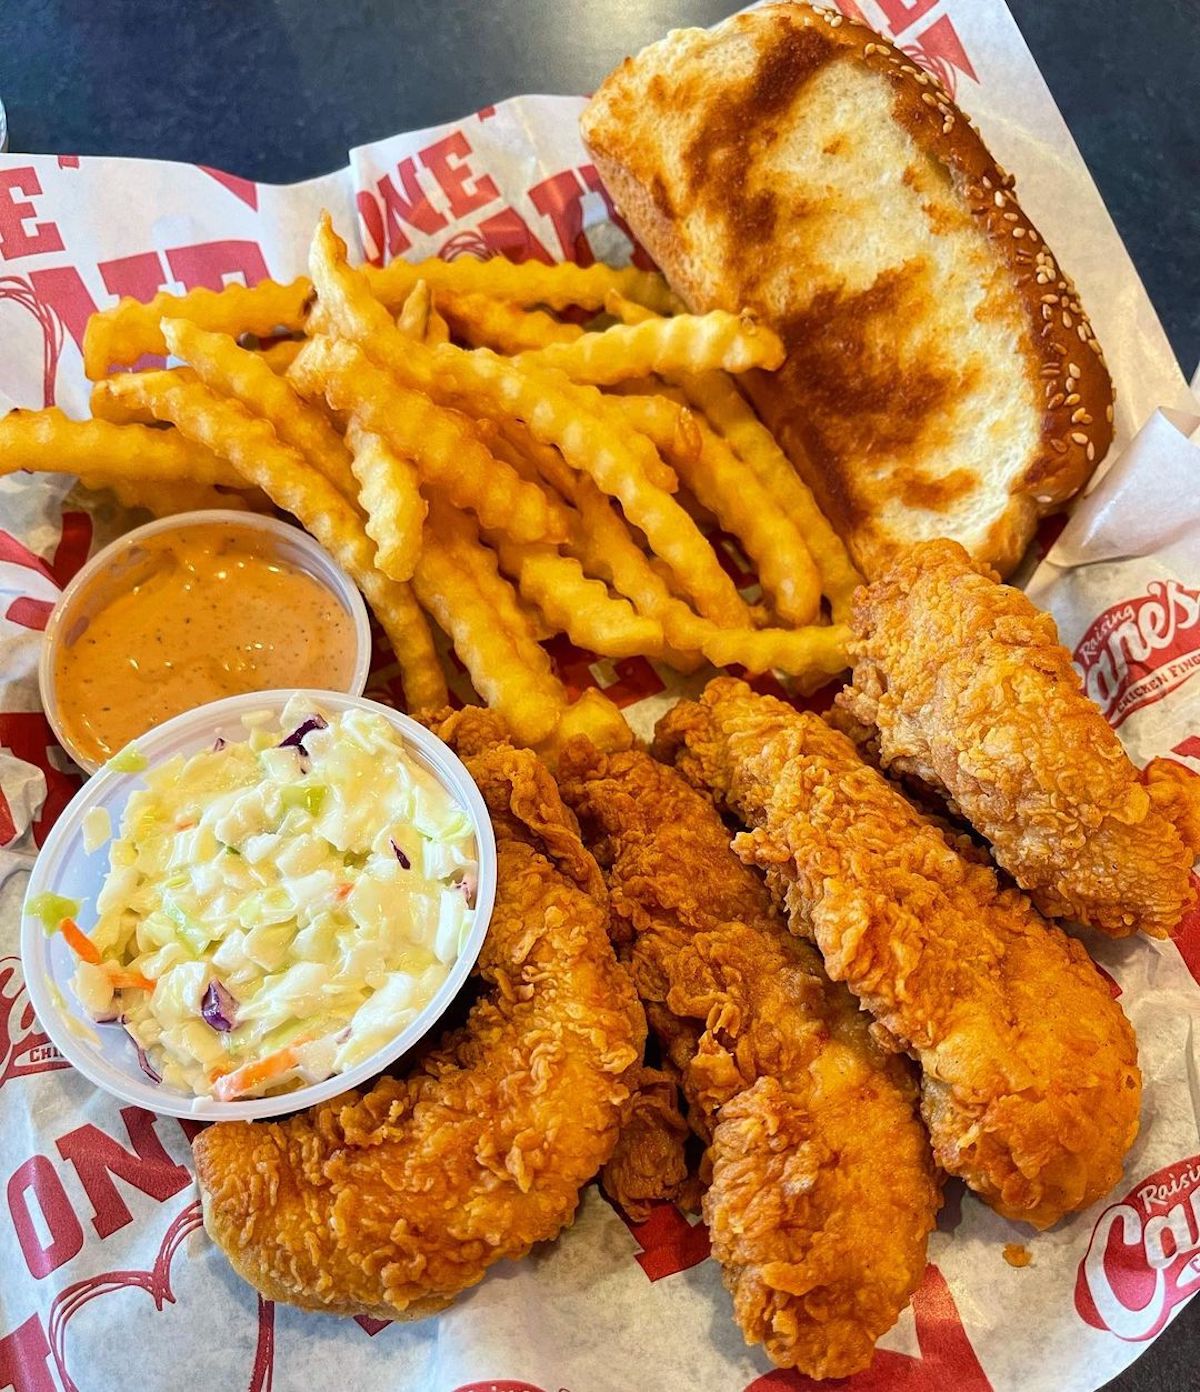 Until the new Orlando location opens its doors, curious foodies must travel all the way to Mobile, AL for a taste of Raising Cane’s, highlighting the significance of the brand’s Central Florida expansion.